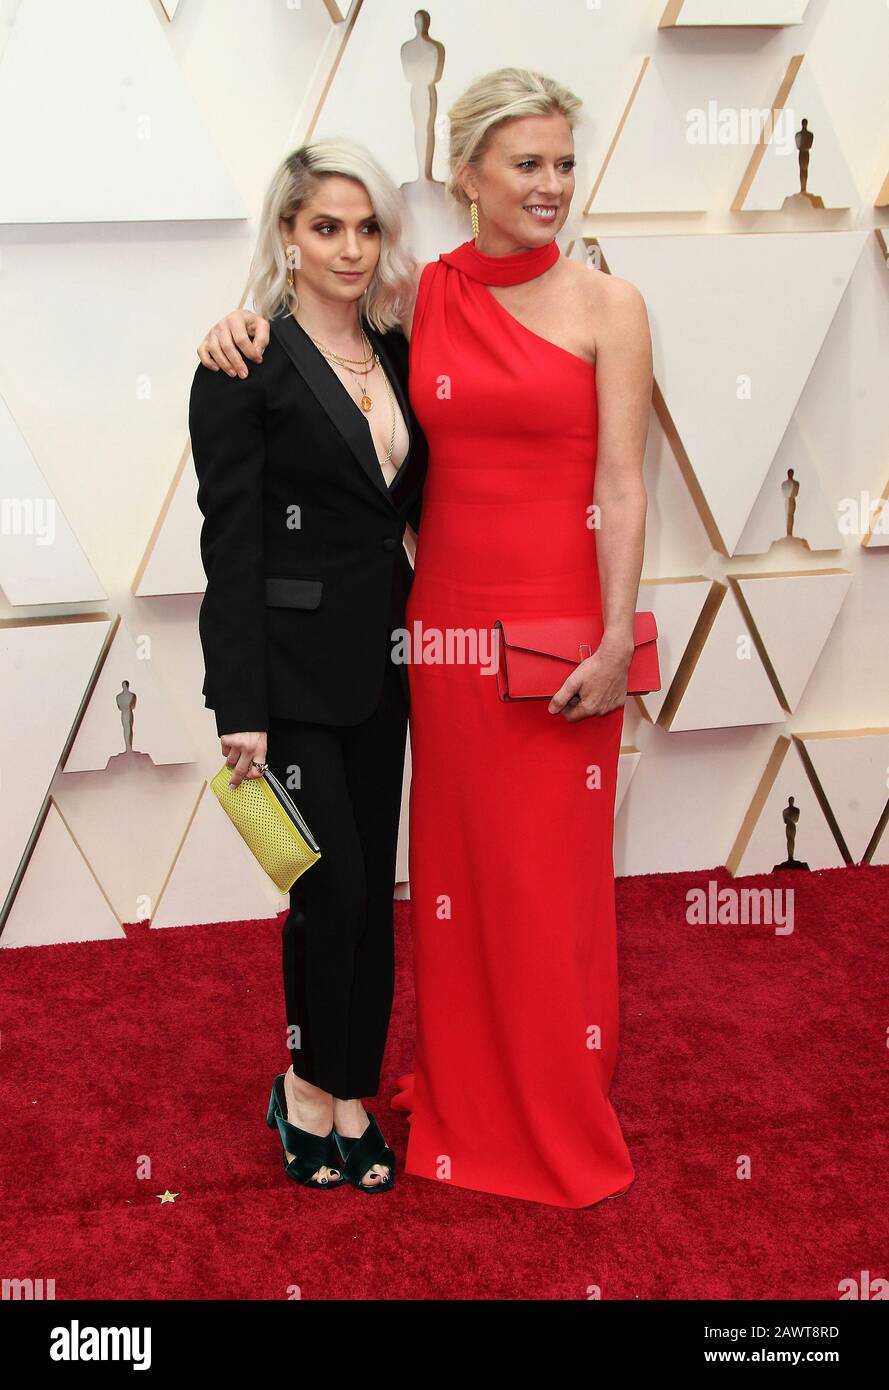 Los Angeles, California, USA. 09th Feb, 2020. Jenno Topping. 92nd Annual Academy Awards presented by the Academy of Motion Picture Arts and Sciences held at Hollywood & Highland Center. Photo Credit: AdMedia/ MediaPunch Credit: MediaPunch Inc/Alamy Live News Stock Photo